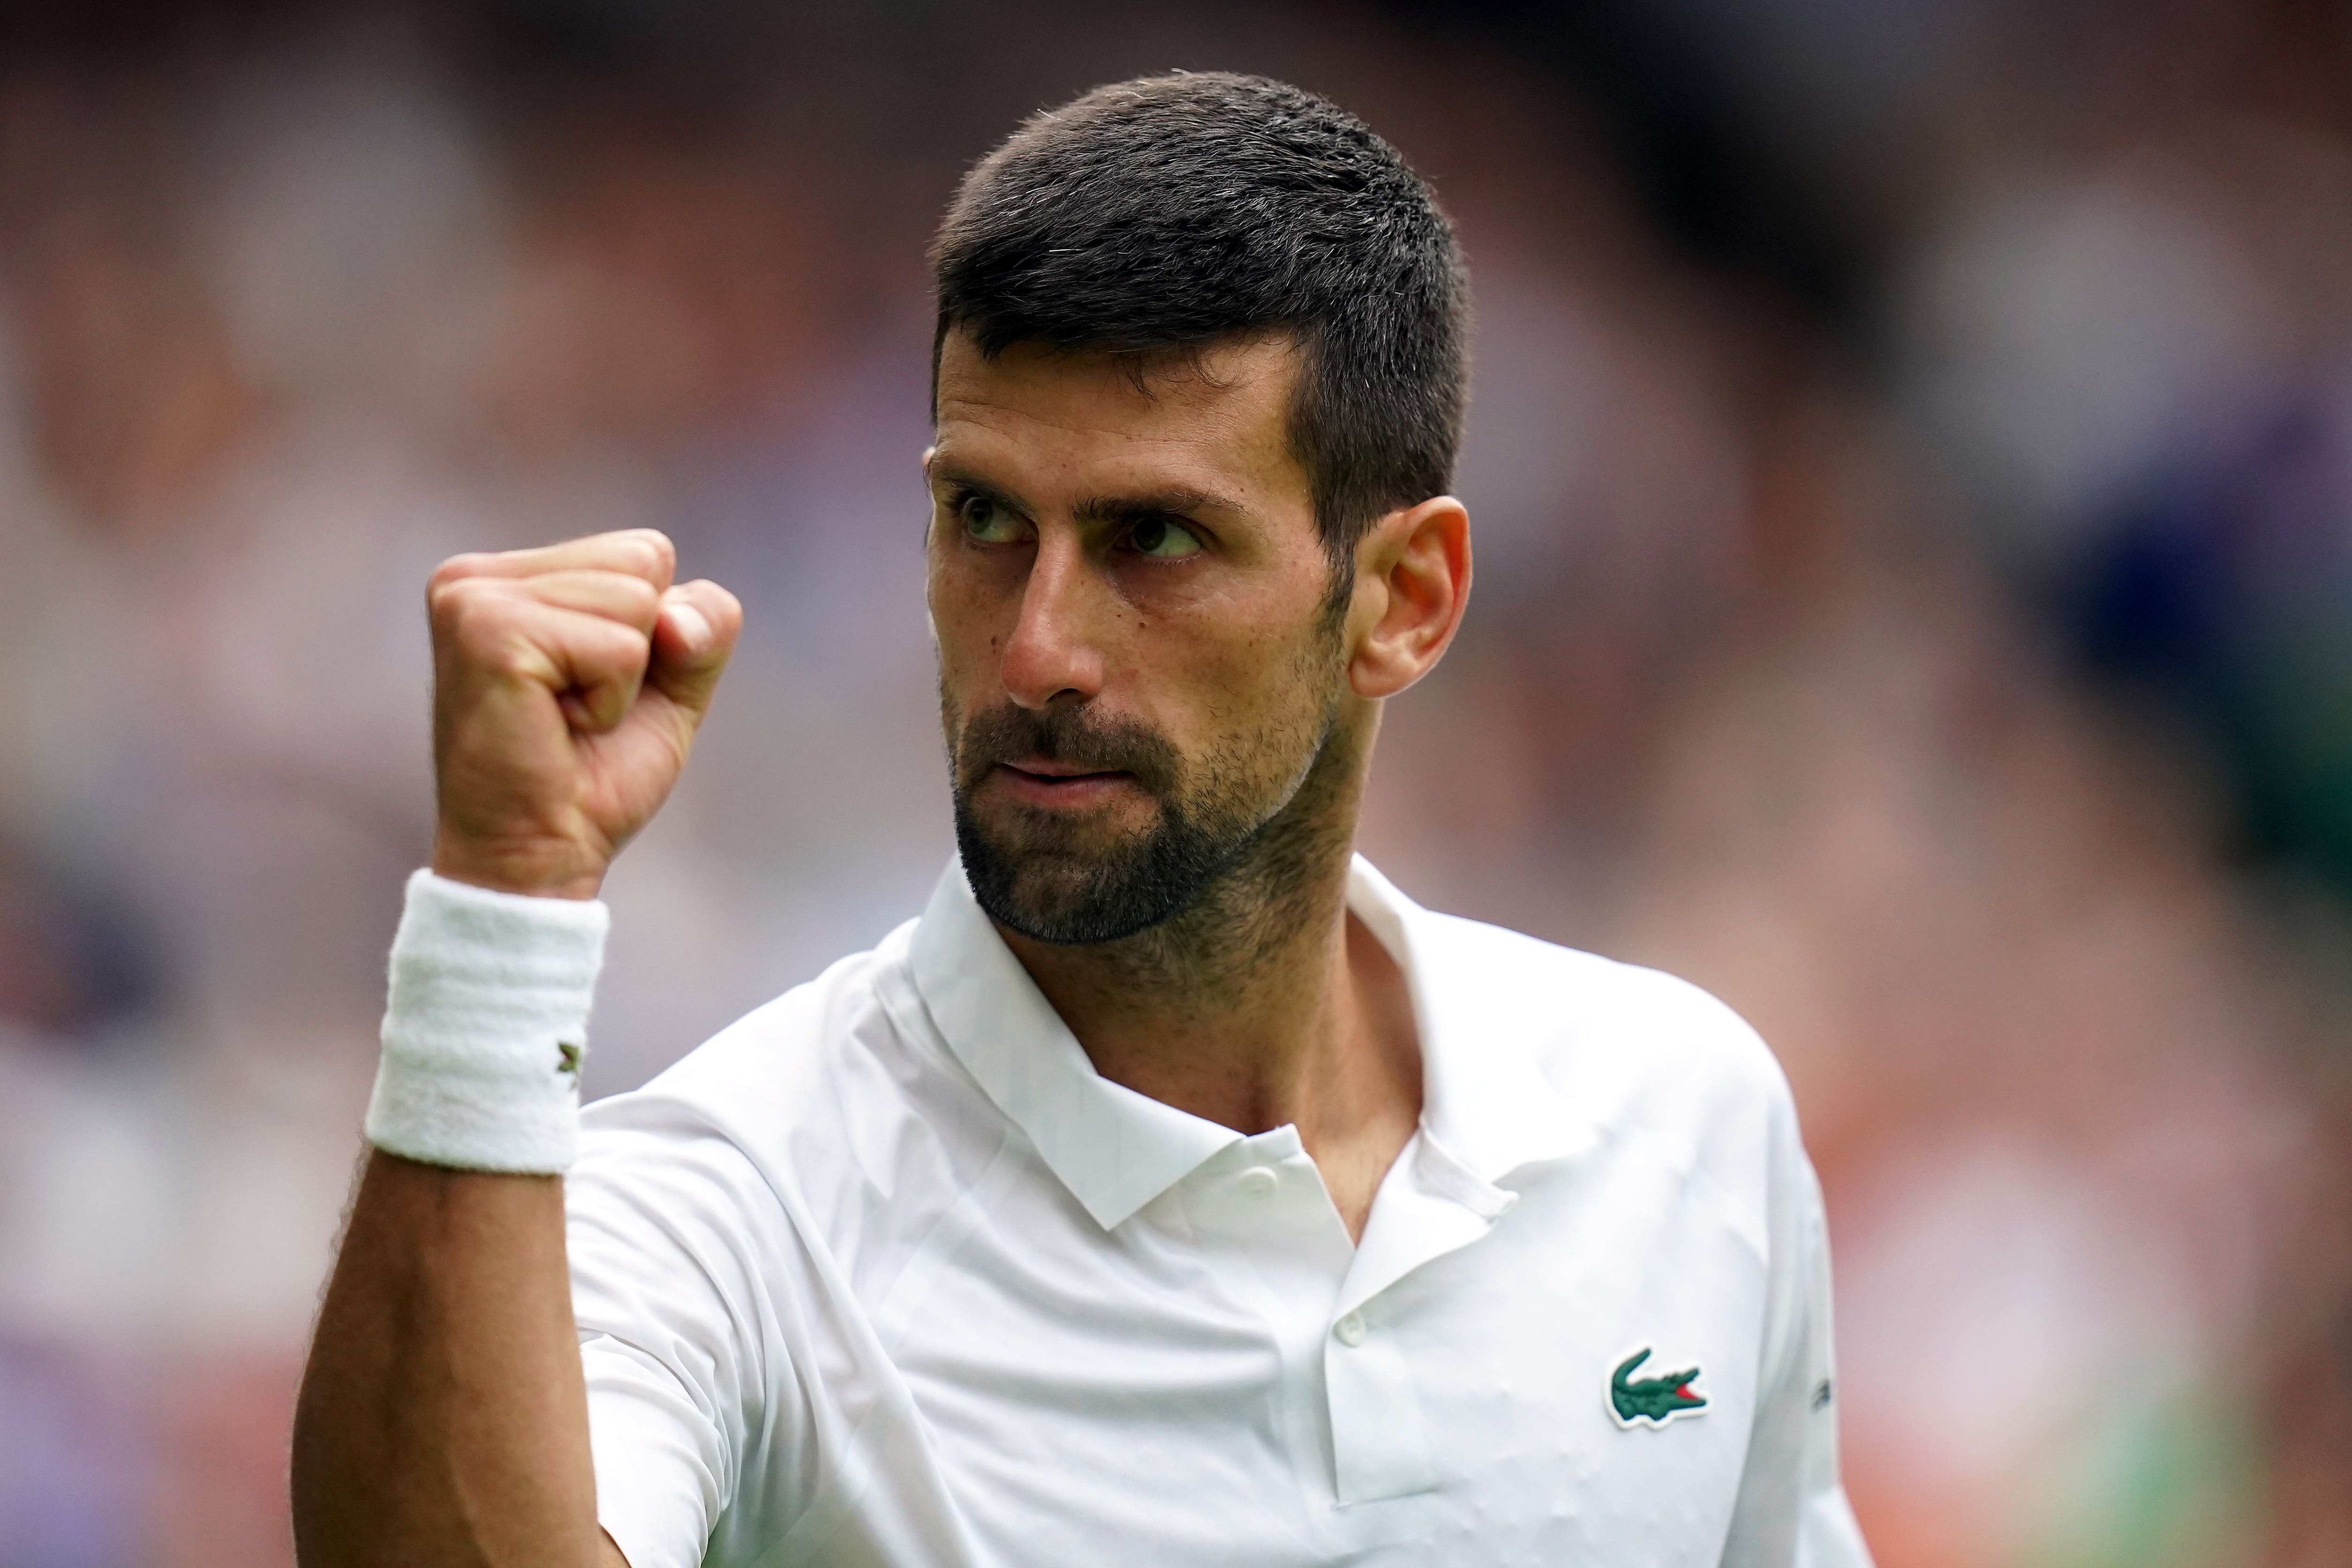 What time is the Wimbledon men’s final?